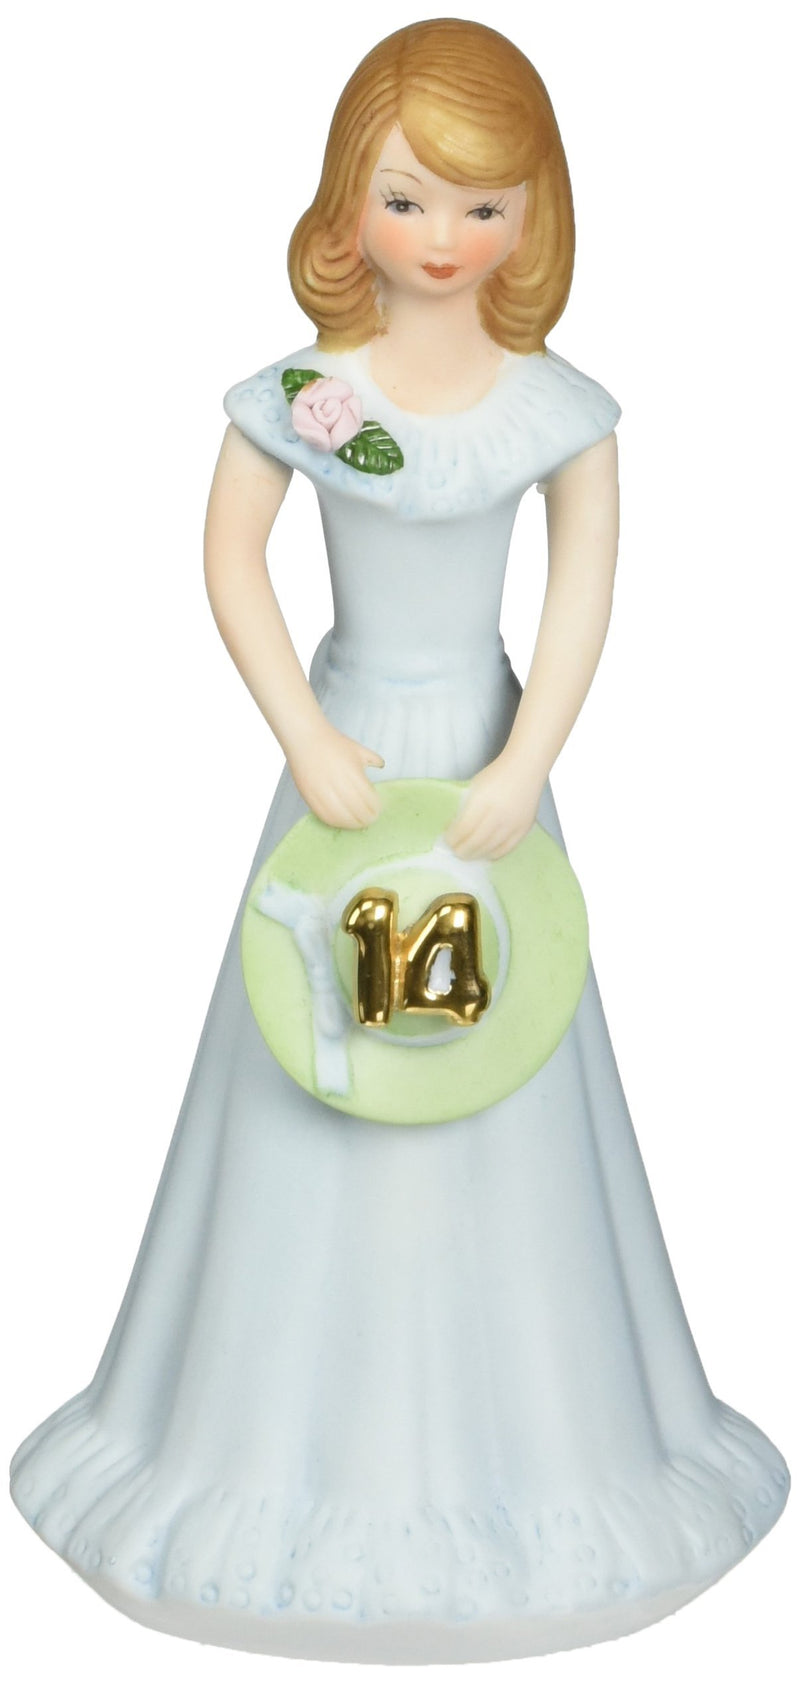 Growing Up Girls Figurine - Brunette Age 14 - The Country Christmas Loft